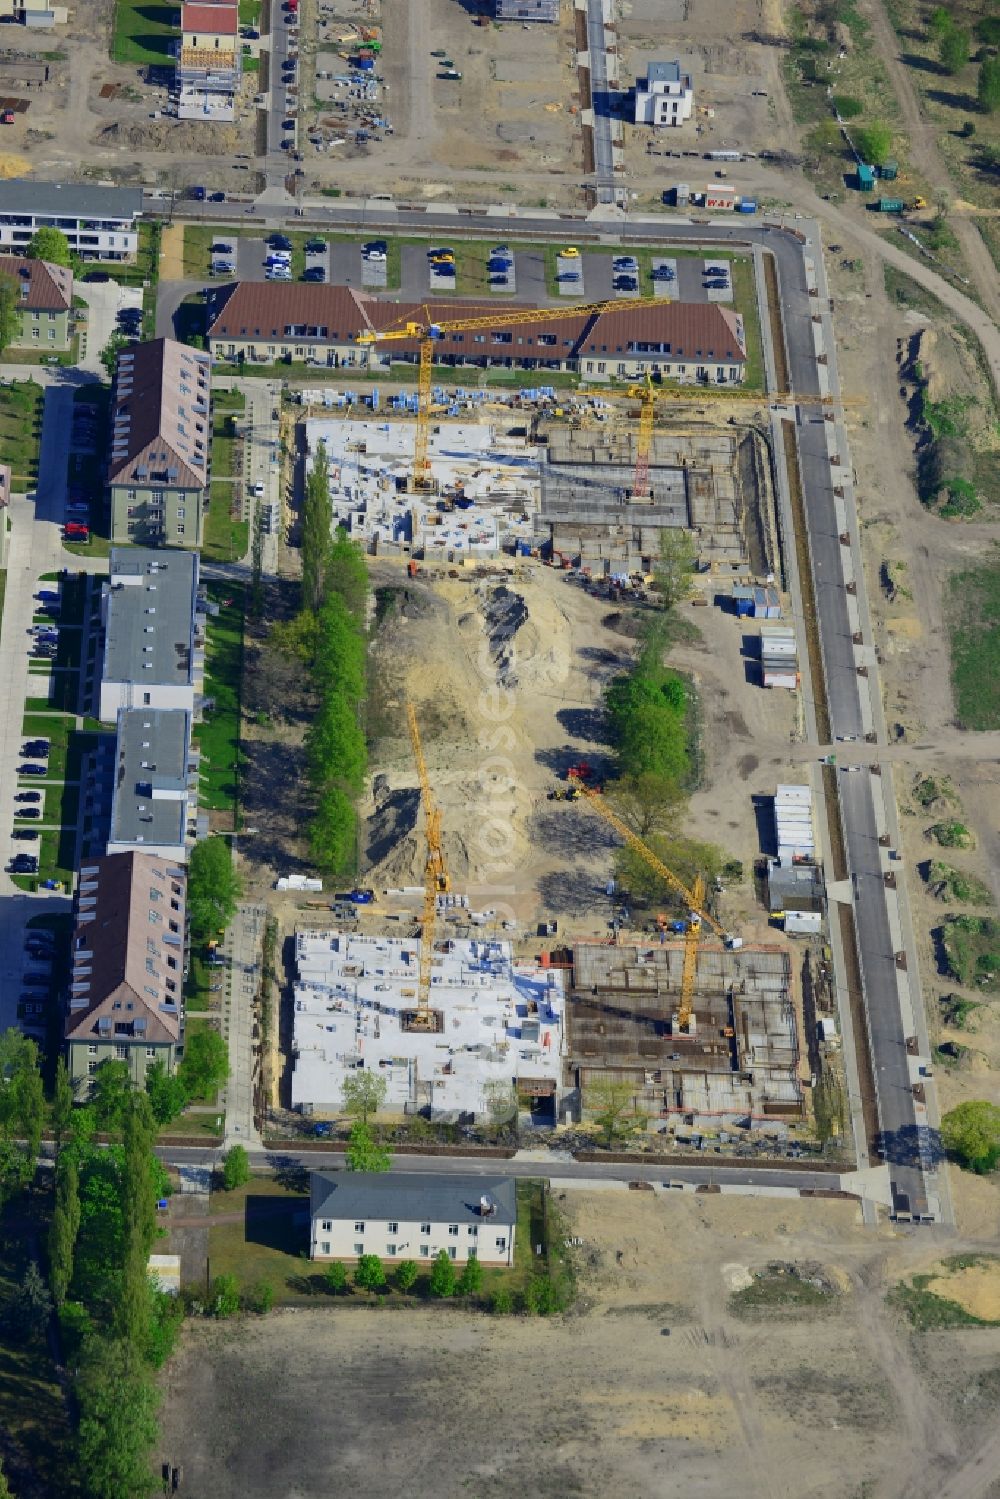 Berlin from the bird's eye view: Construction site for a residential area in Karlshorst in the Lichtenberg district of Berlin in Germany. The development of InCasa project with semi-detached houses and residential areas is located on site of the historic military base in Karlshorst